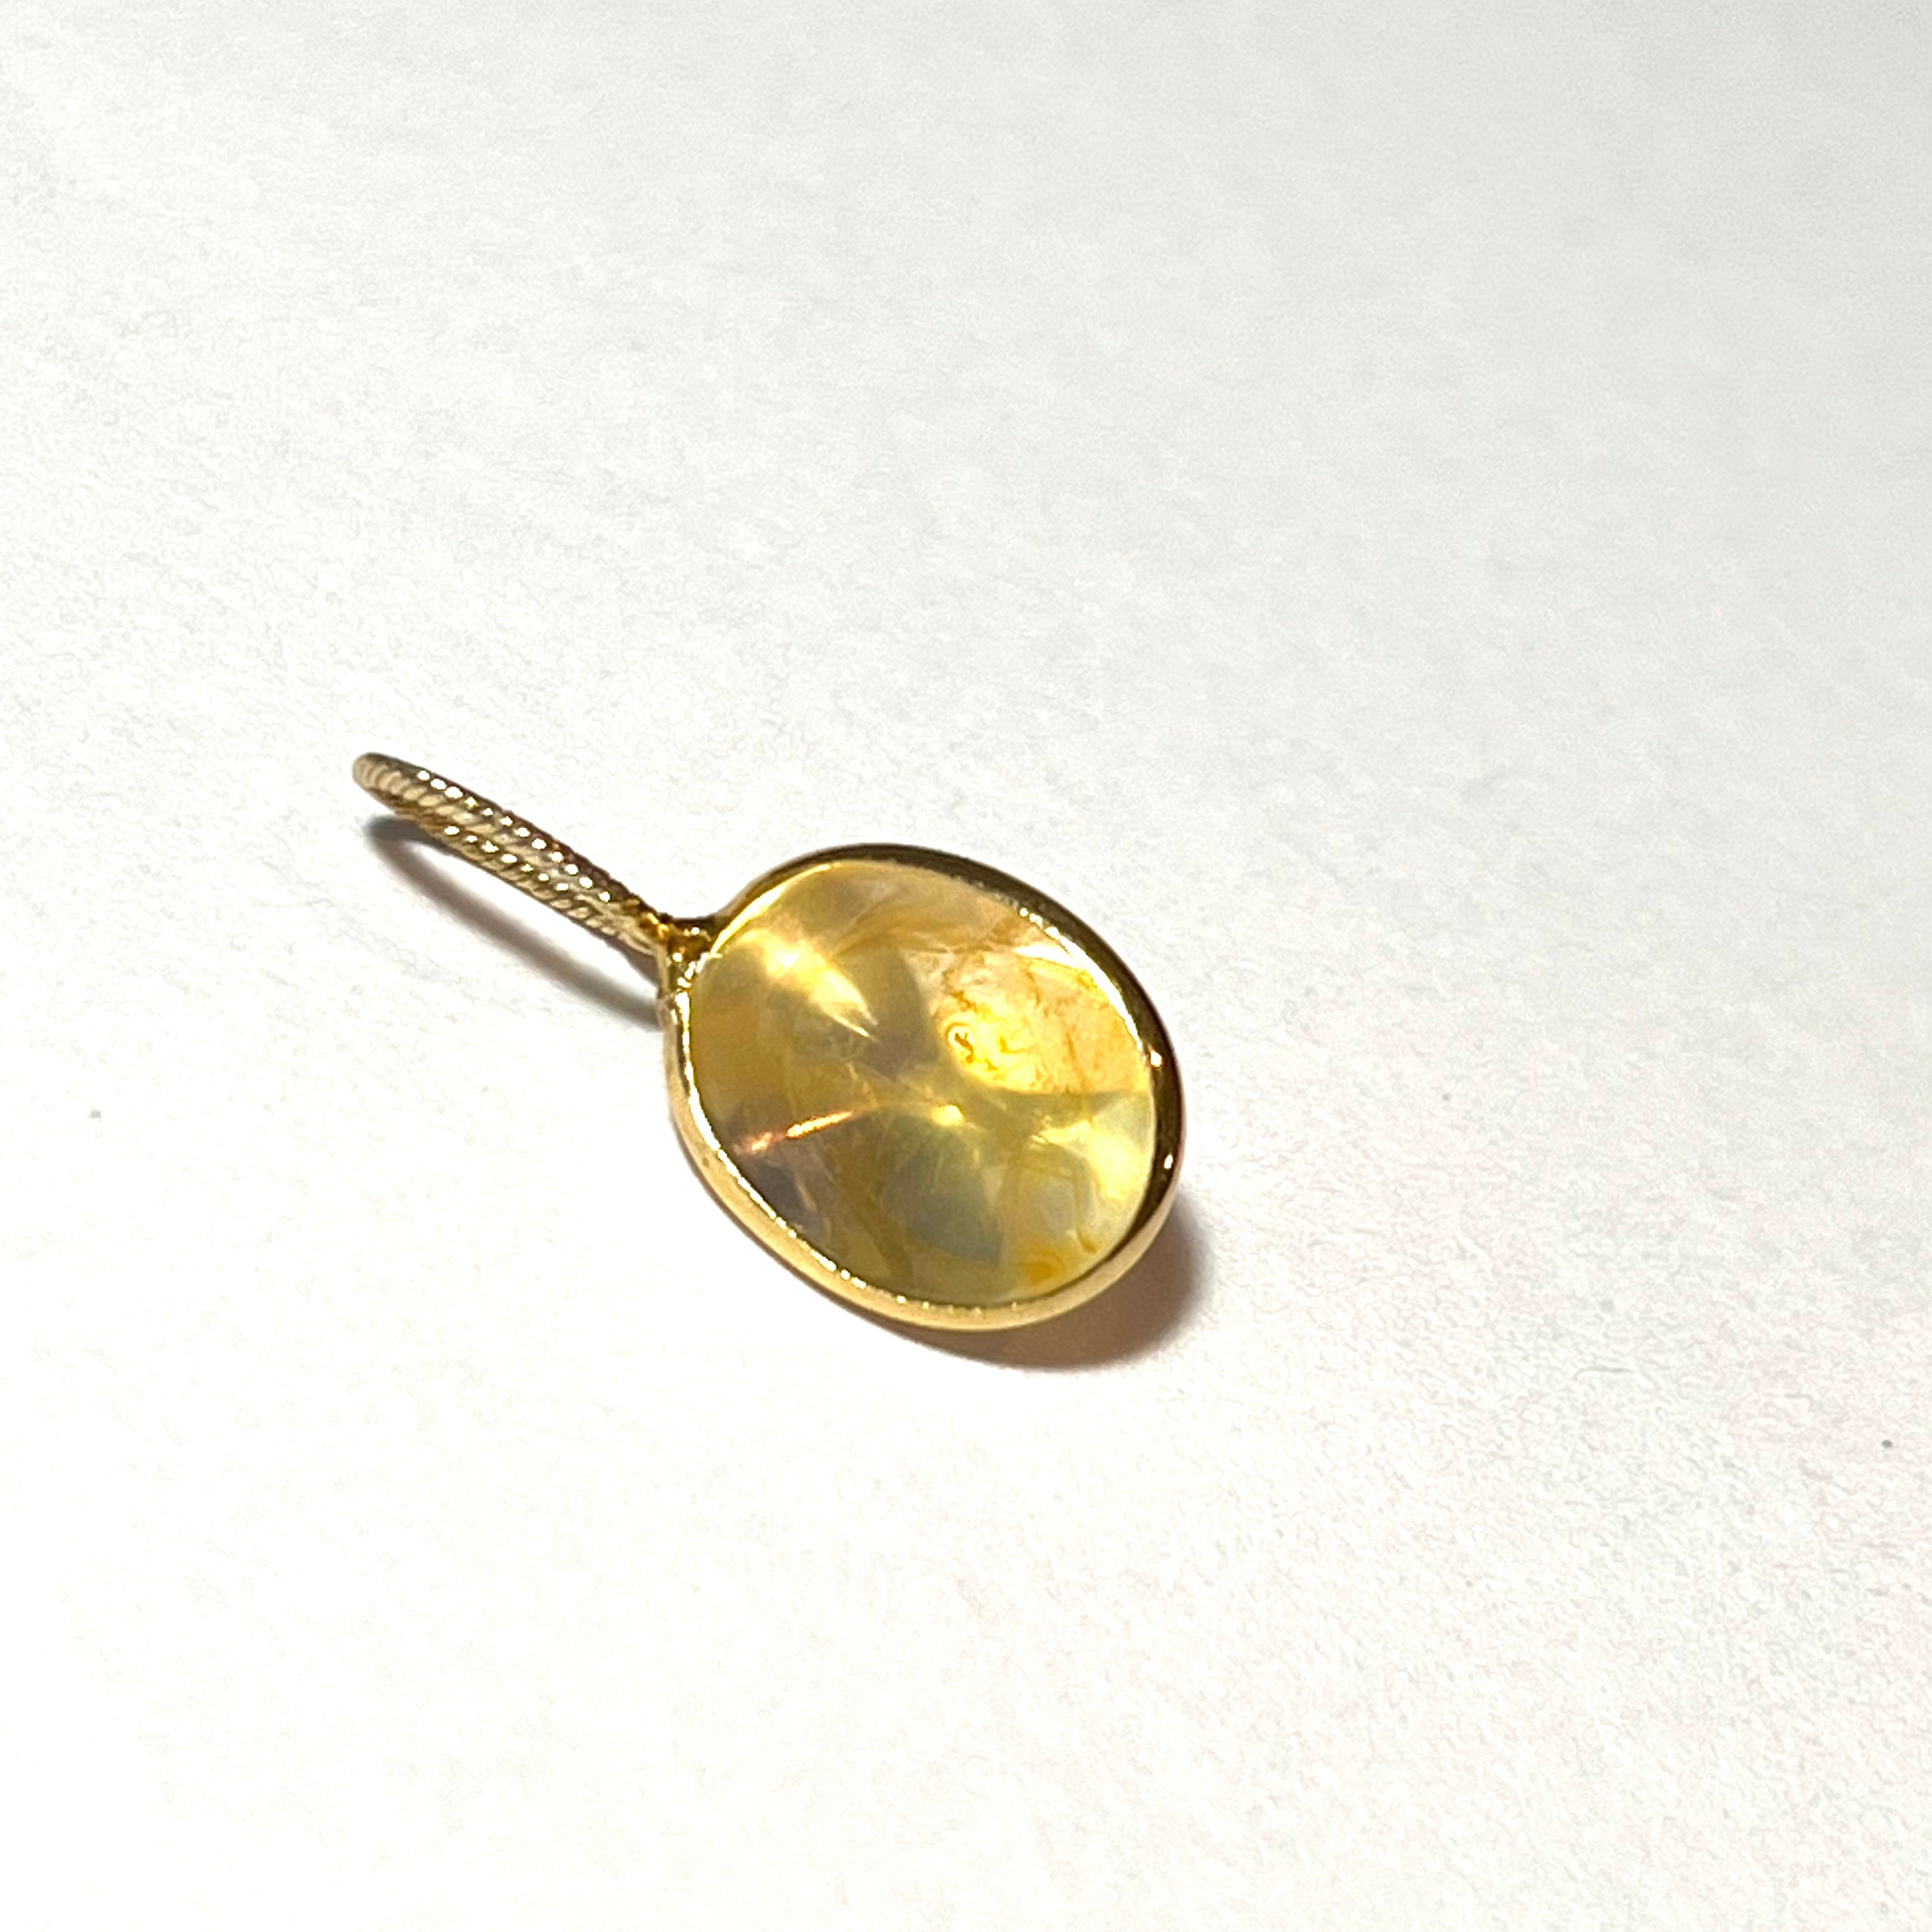 2.79ct Oval Yellow Agate 14K Yellow Gold Pendant Charm 18x12mm